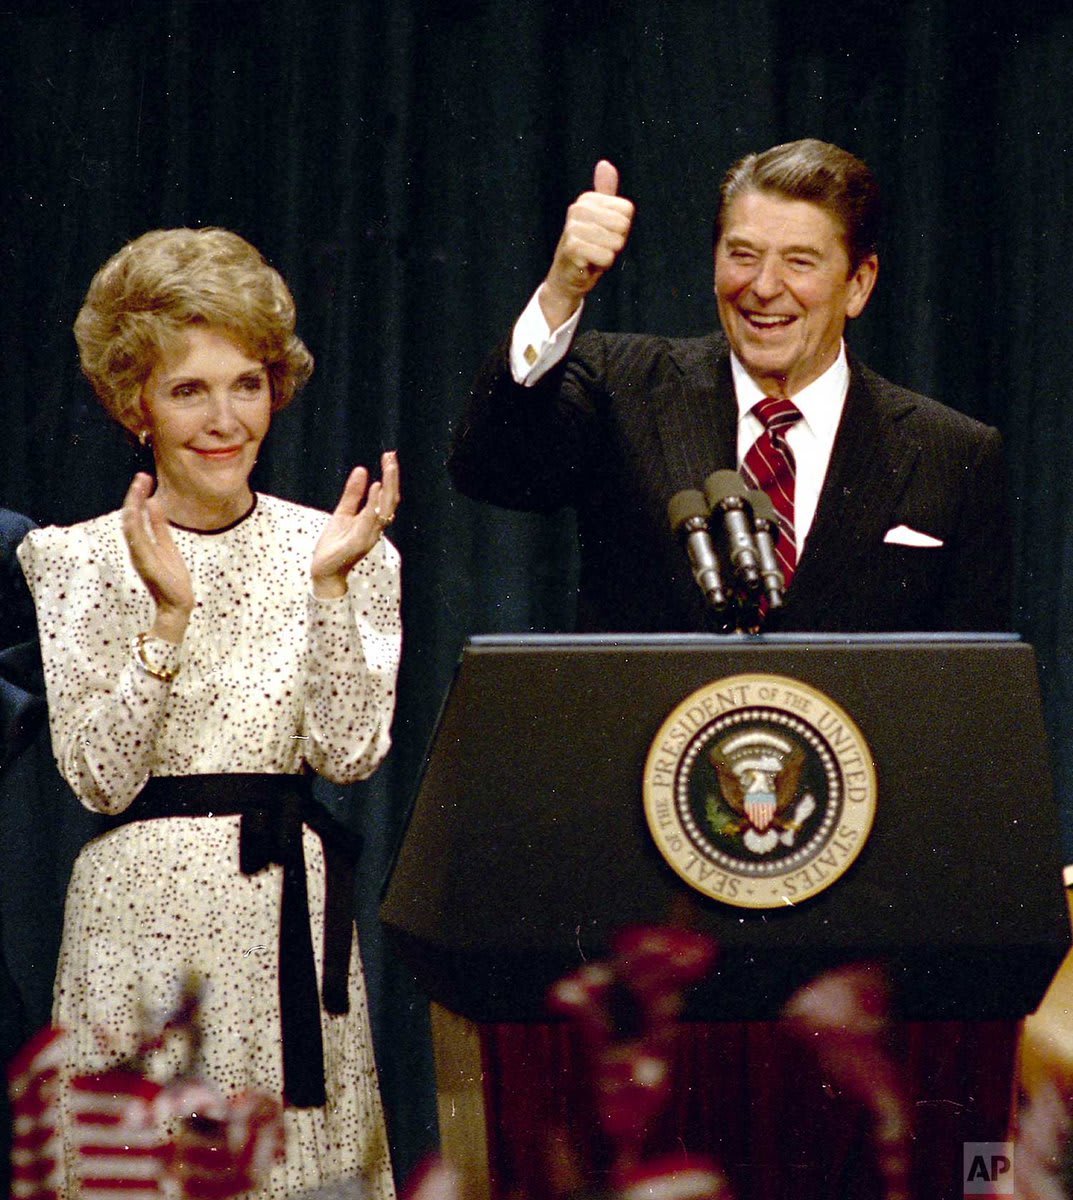 35 years ago today, President Ronald Reagan won re-election by a landslide over former Vice President Walter Mondale, the Democratic challenger.